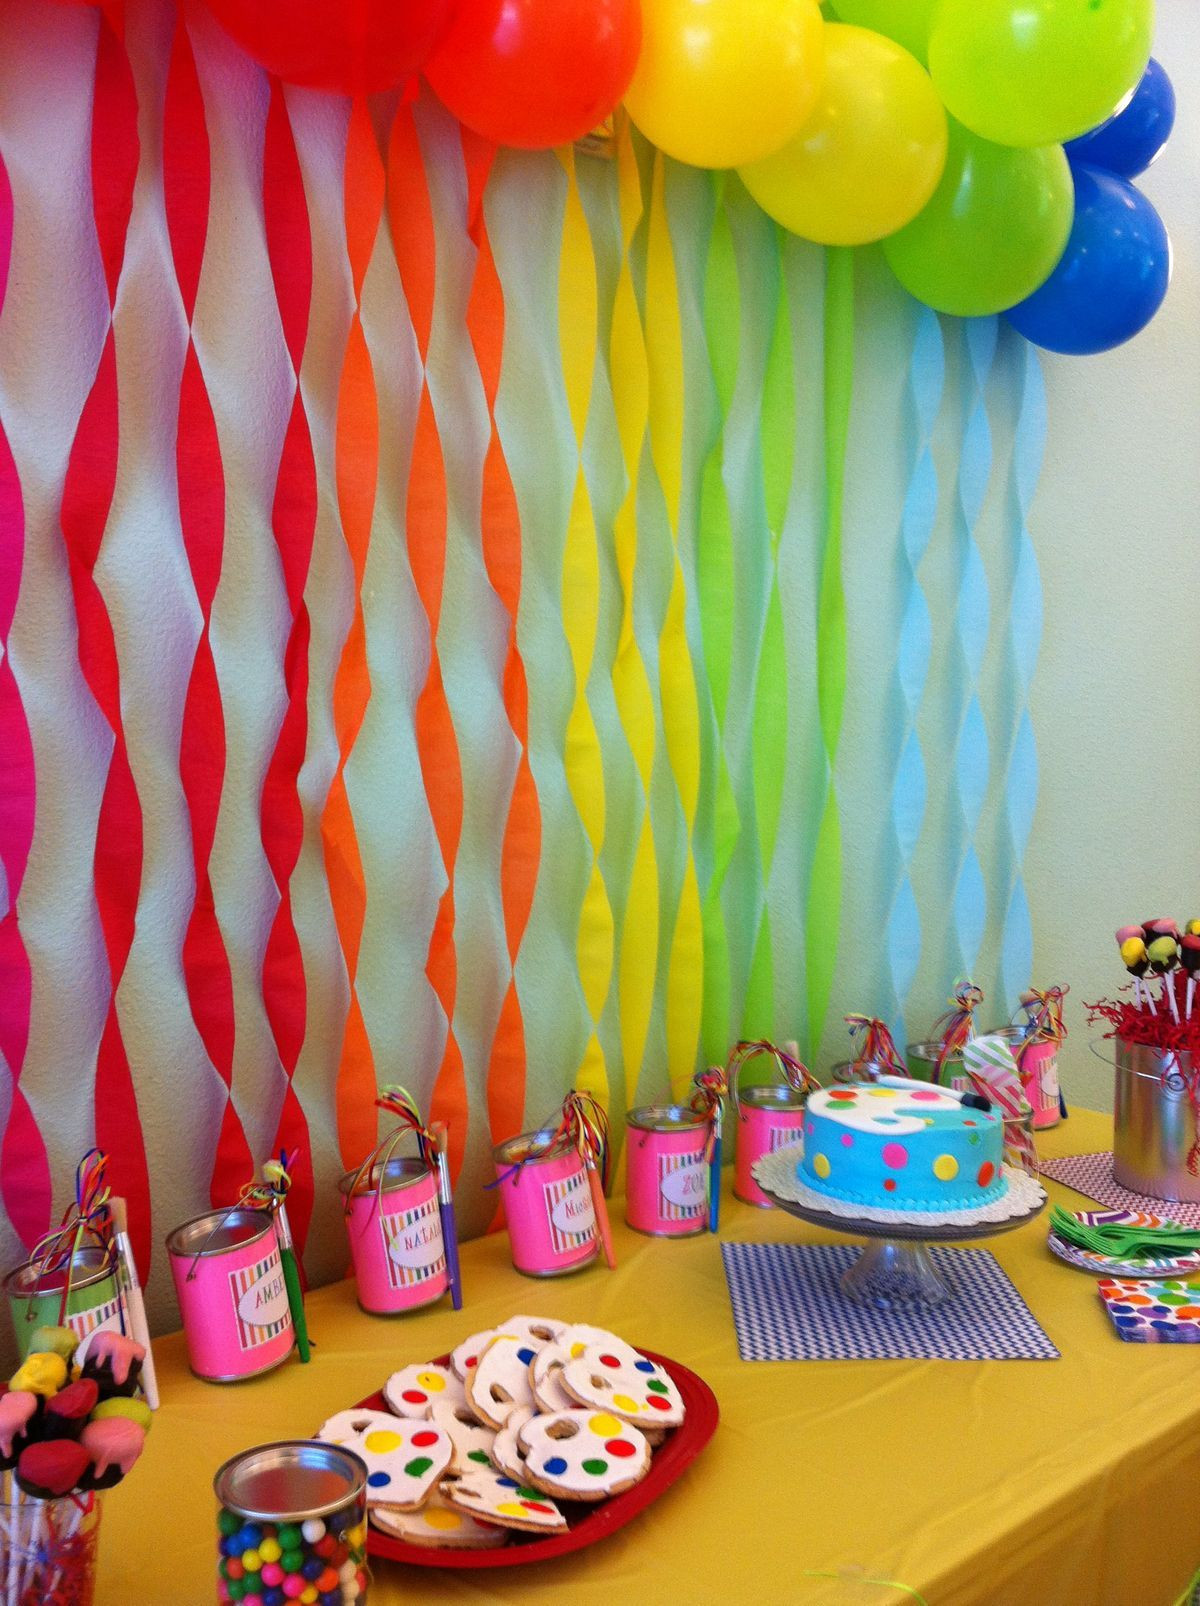 9 Year Old Boy Birthday Party Ideas At Home
 So Perf Birthday Party for an 8 year old girl Rocker